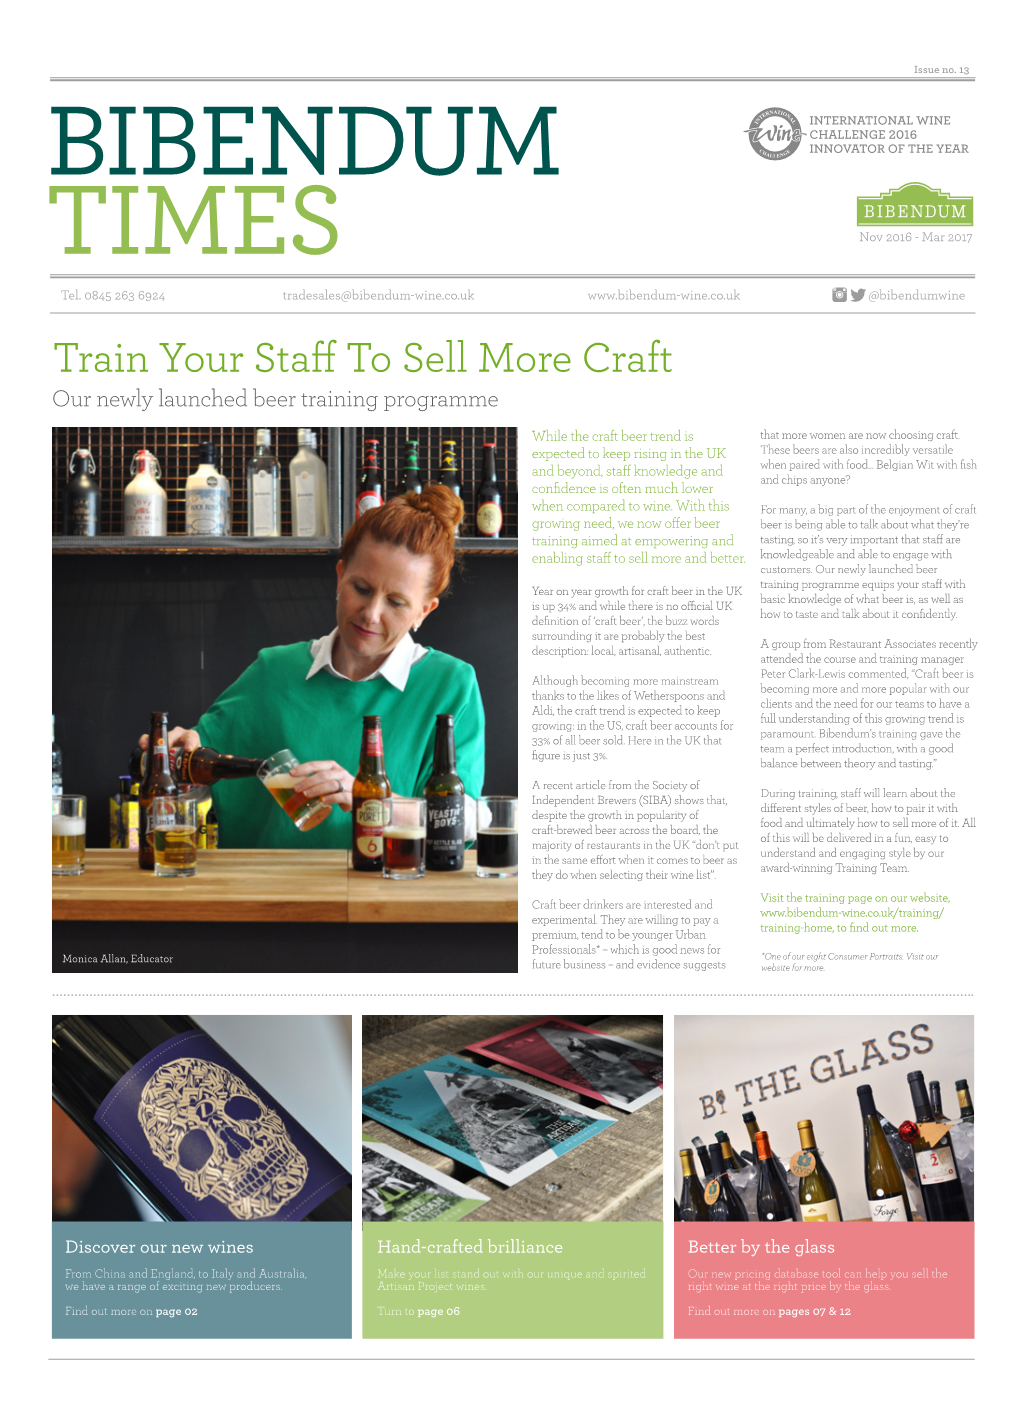 Train Your Staff to Sell More Craft Our Newly Launched Beer Training Programme